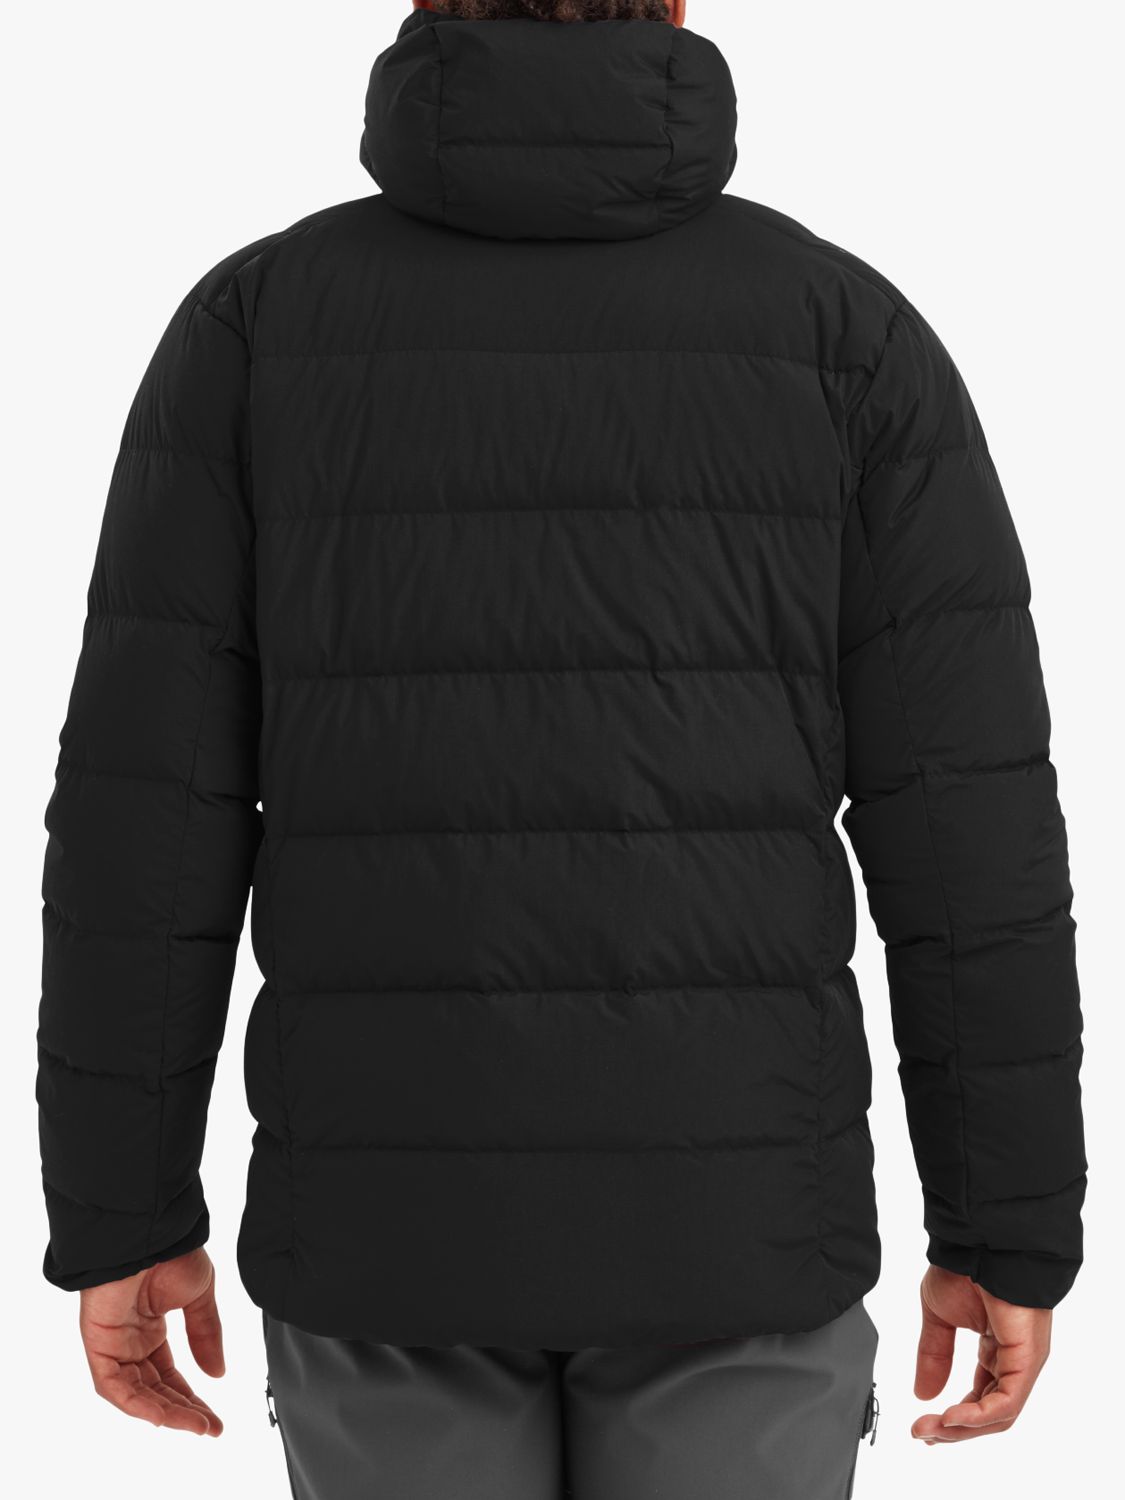 Montane Tundra Men's Recycled Down Puffer Jacket, Black, L